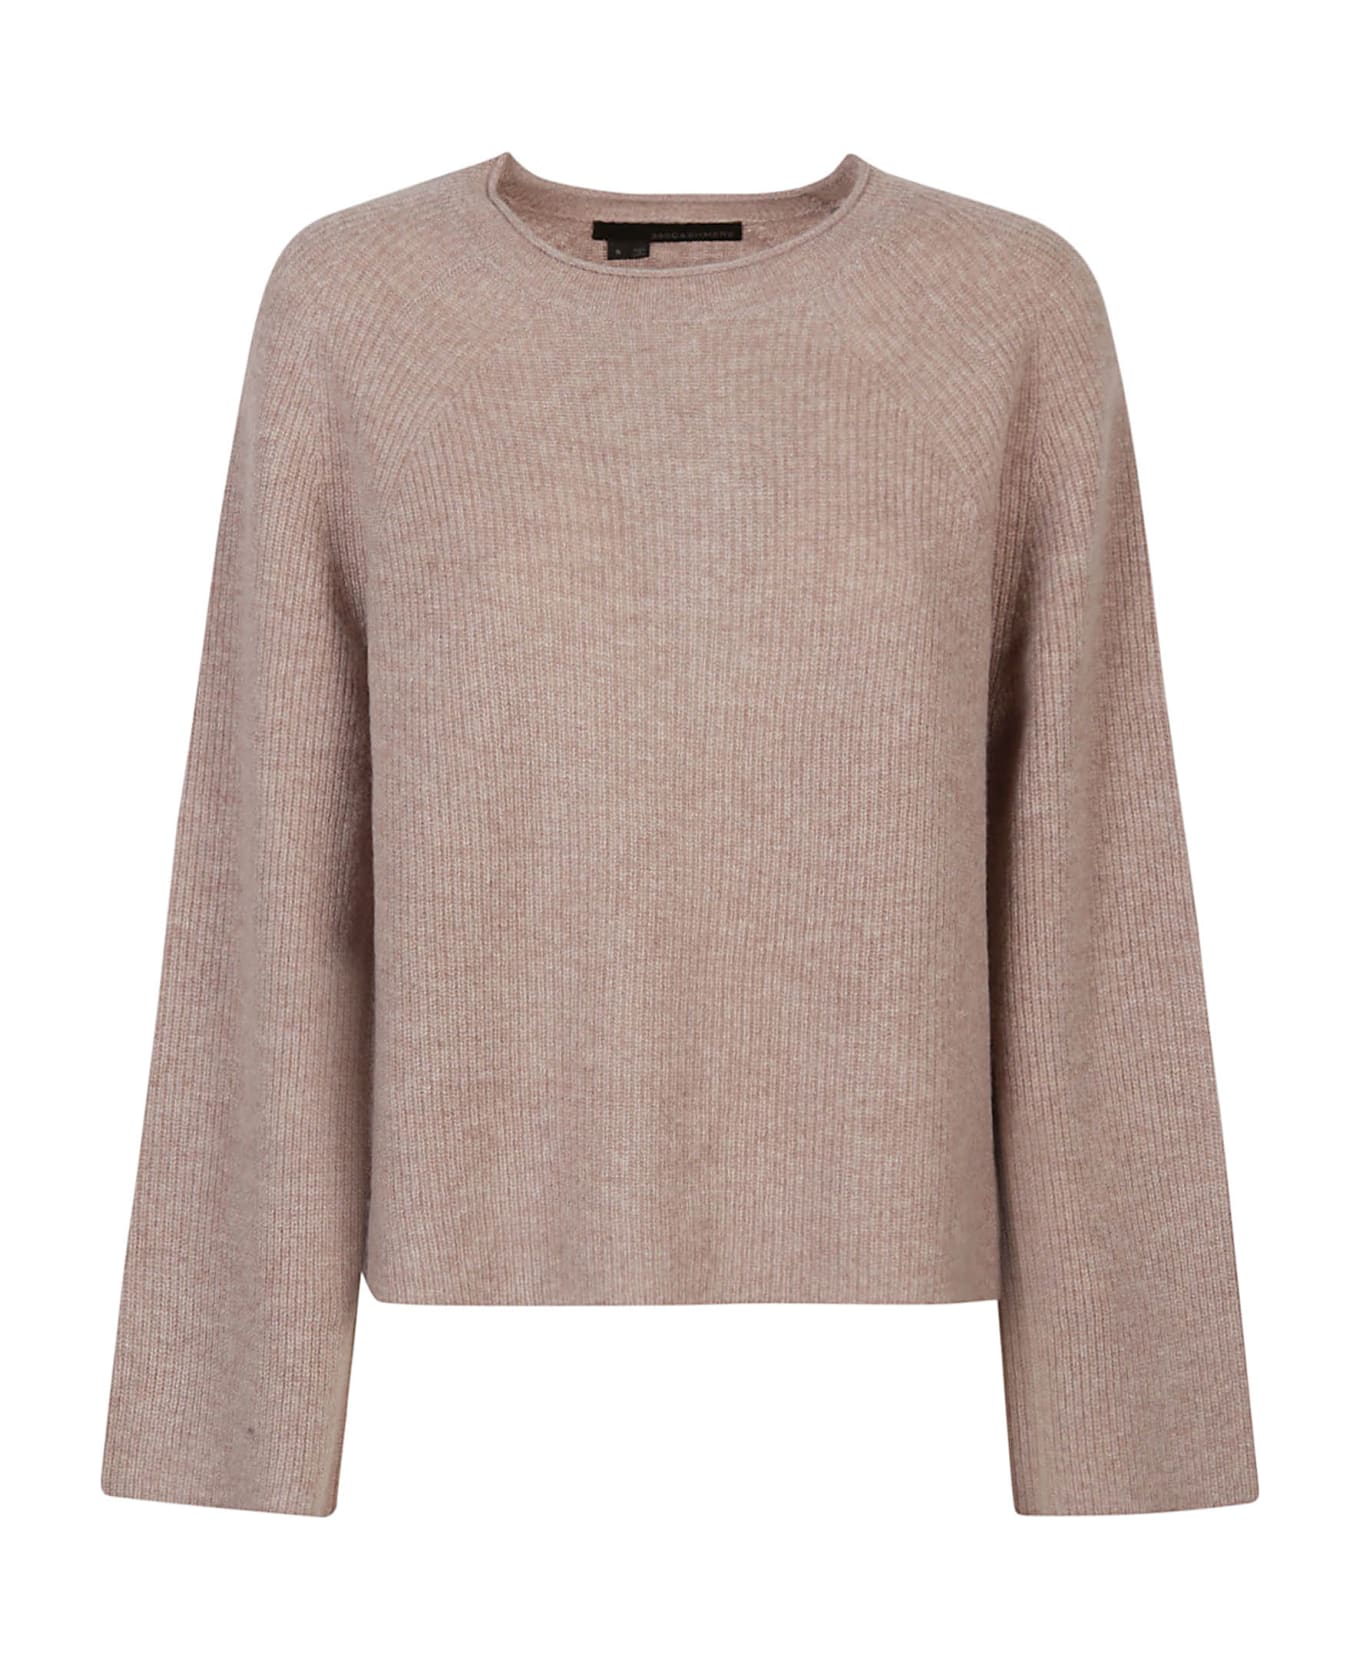 360Cashmere Sophie Trapeze Round Neck Sweater - Toast